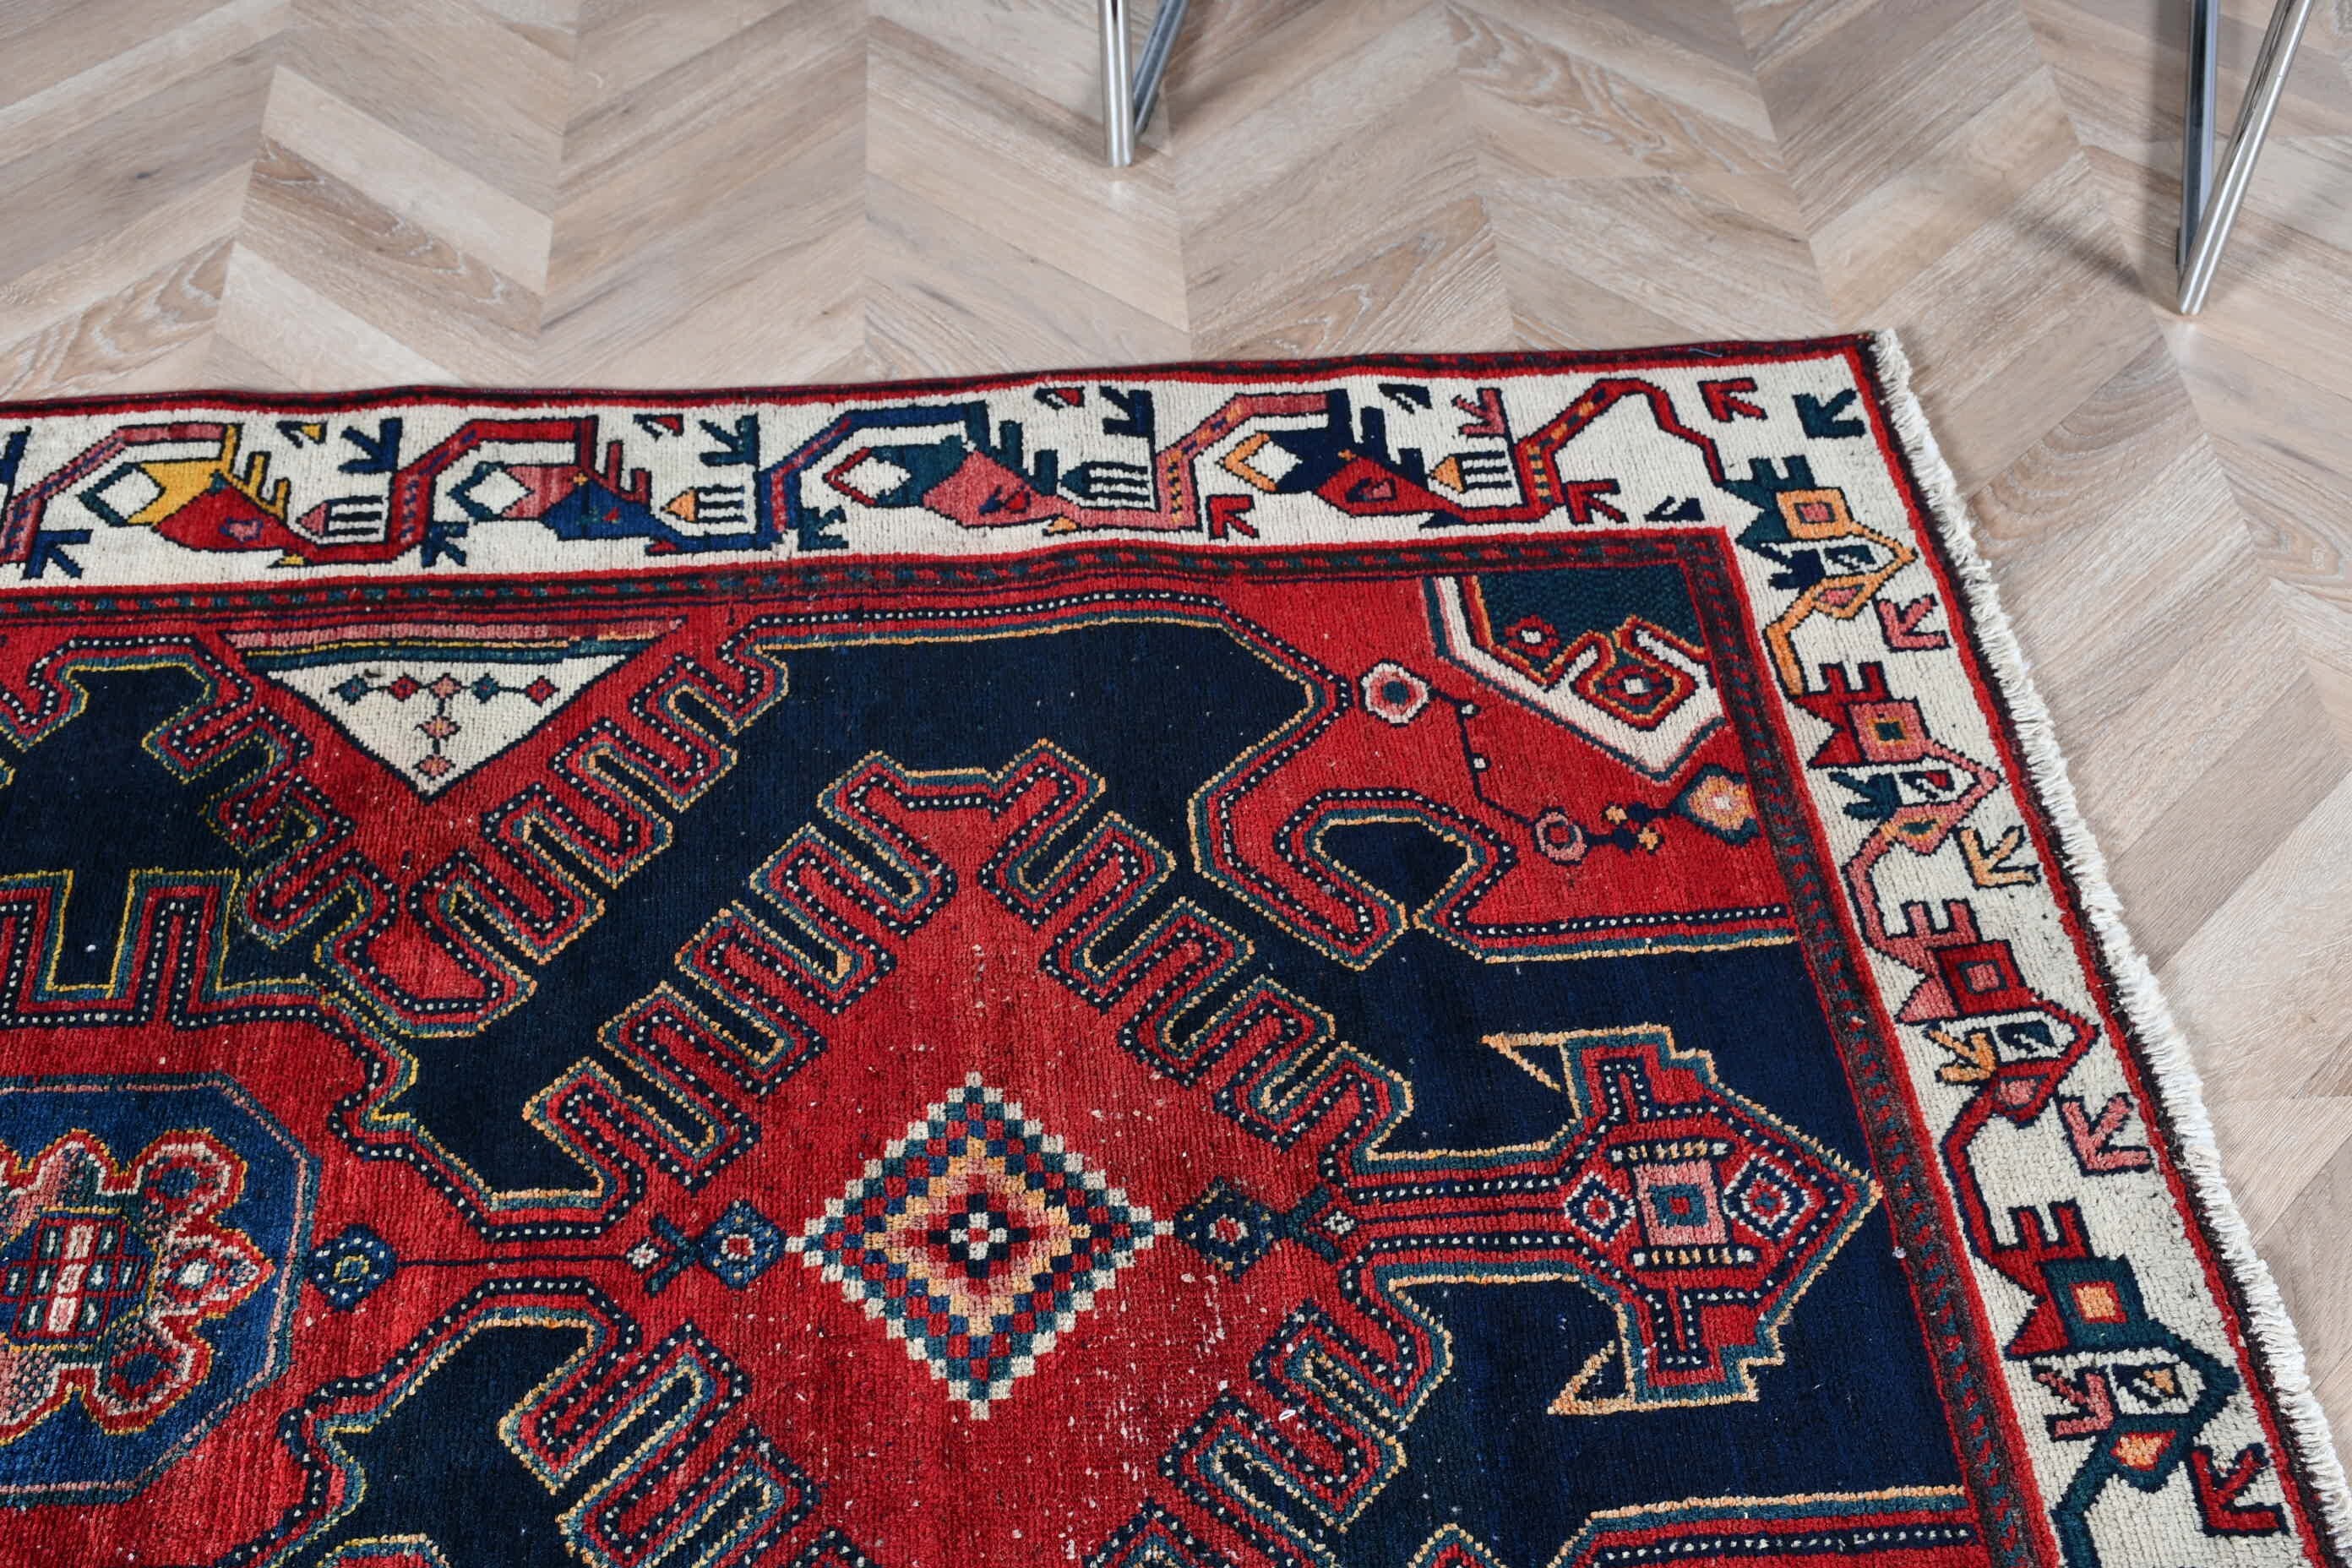 Red Bedroom Rugs, Turkish Rugs, Nursery Rug, Anatolian Rugs, Home Decor Rug, Rugs for Kitchen, Vintage Rug, 3.9x6.1 ft Accent Rugs, Old Rug